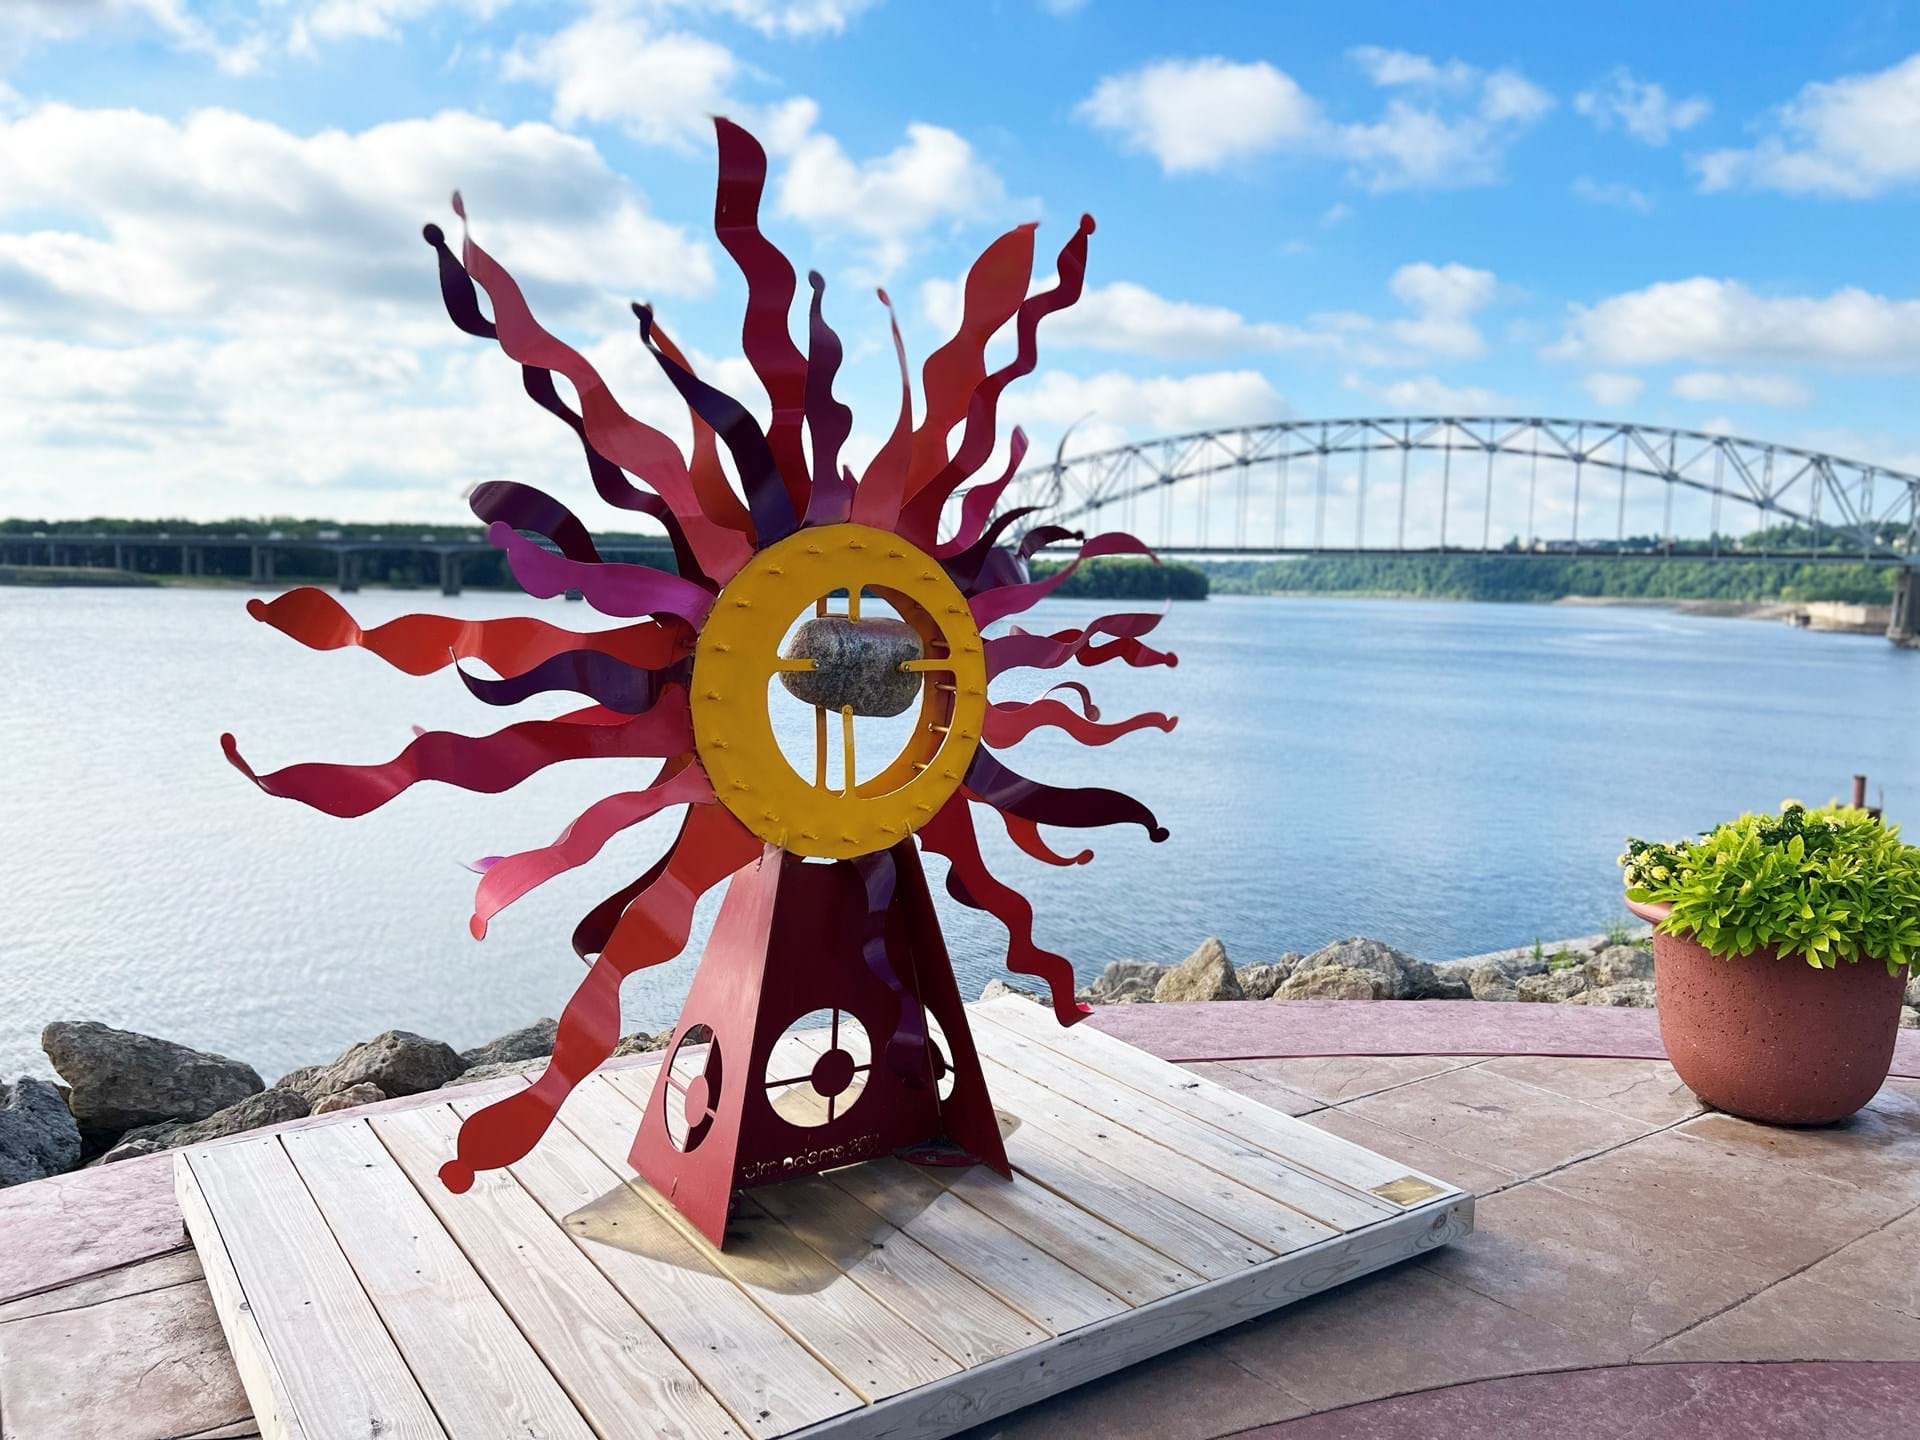 The Other Extreme by Tim Adams of Webster City, IA. On display through end of July 2023 along the Mississippi Riverwalk in the Port of Dubuque.